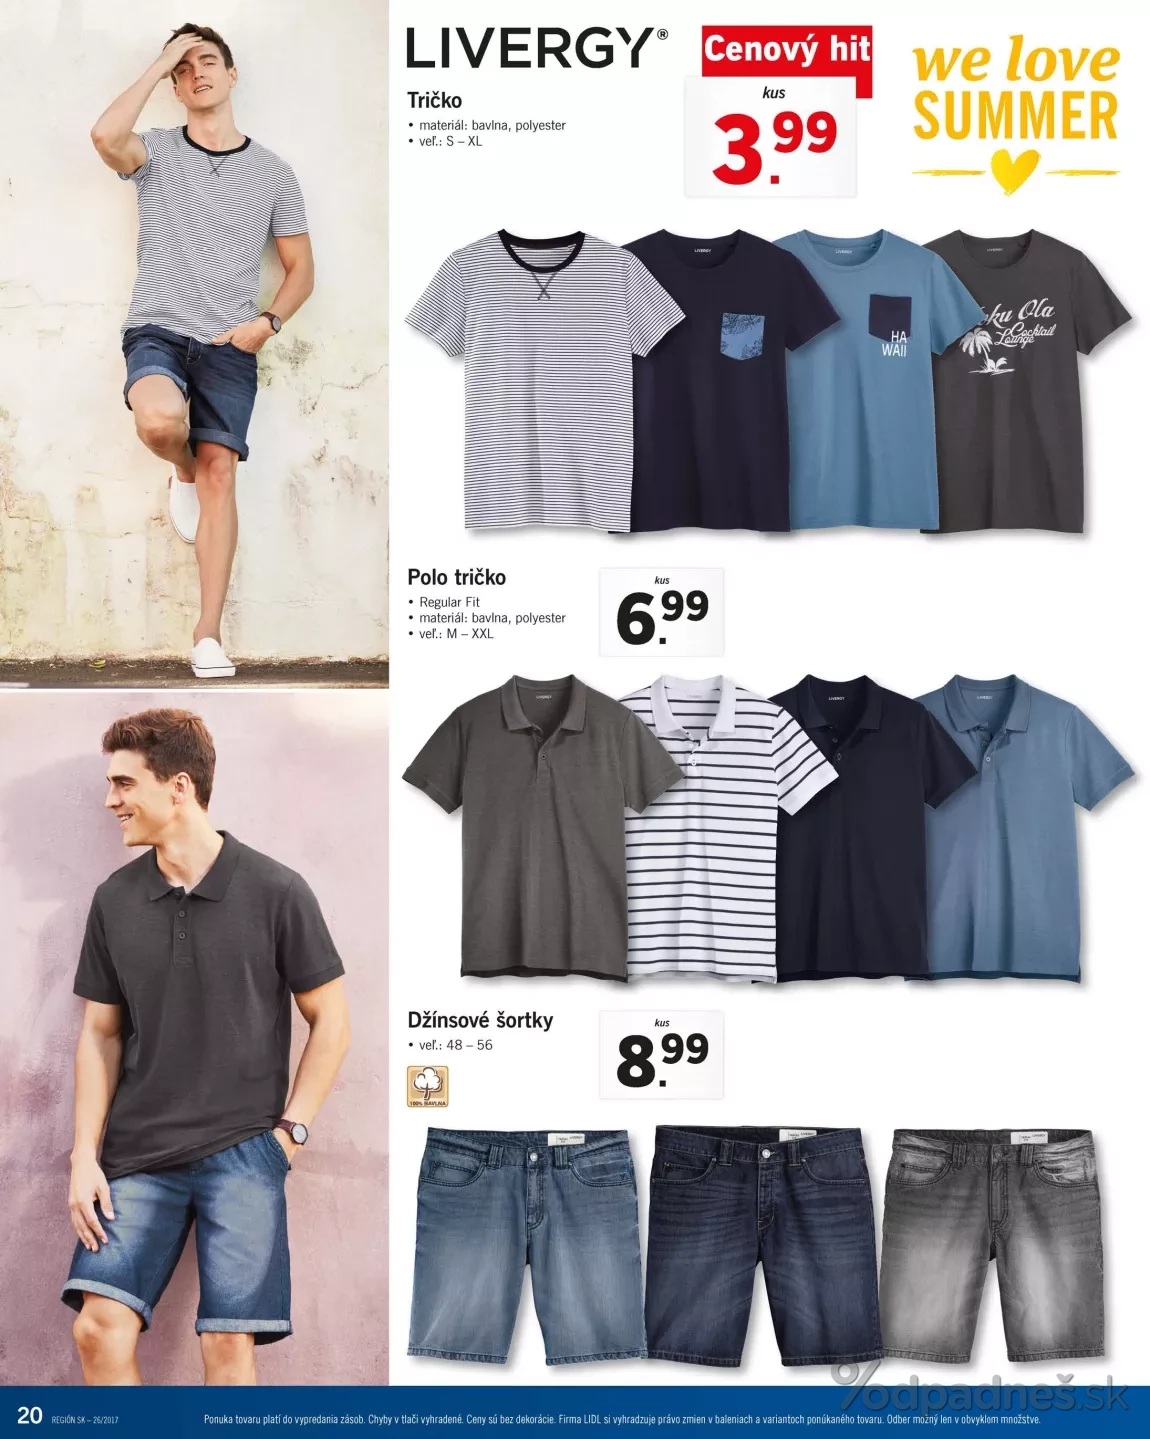 LIDL ESMARA/LIVERGY/CRIVIT Collection -CHOOSE  Sneakers/Slippers/T-Shirt/Pool Bed